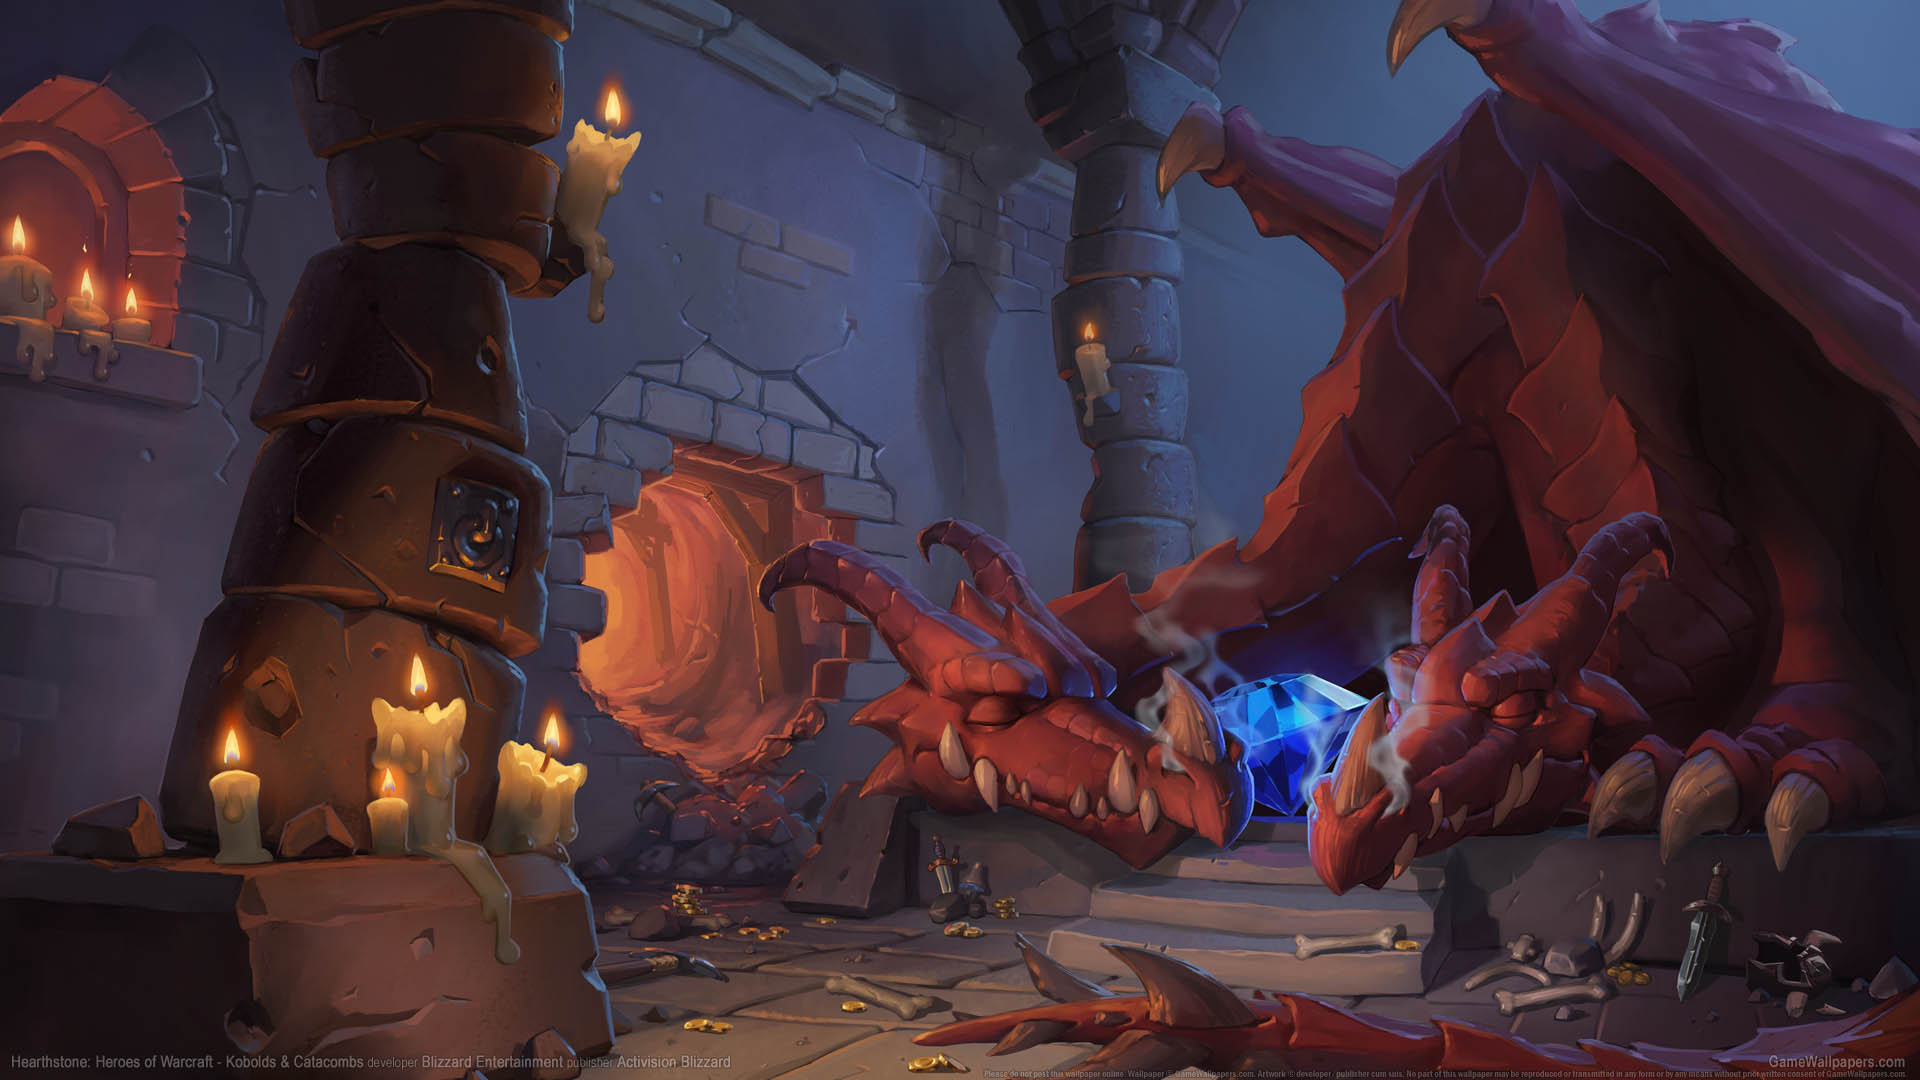 Hearthstone: Heroes of Warcraft - Kobolds & Catacombs achtergrond 01 1920x1080